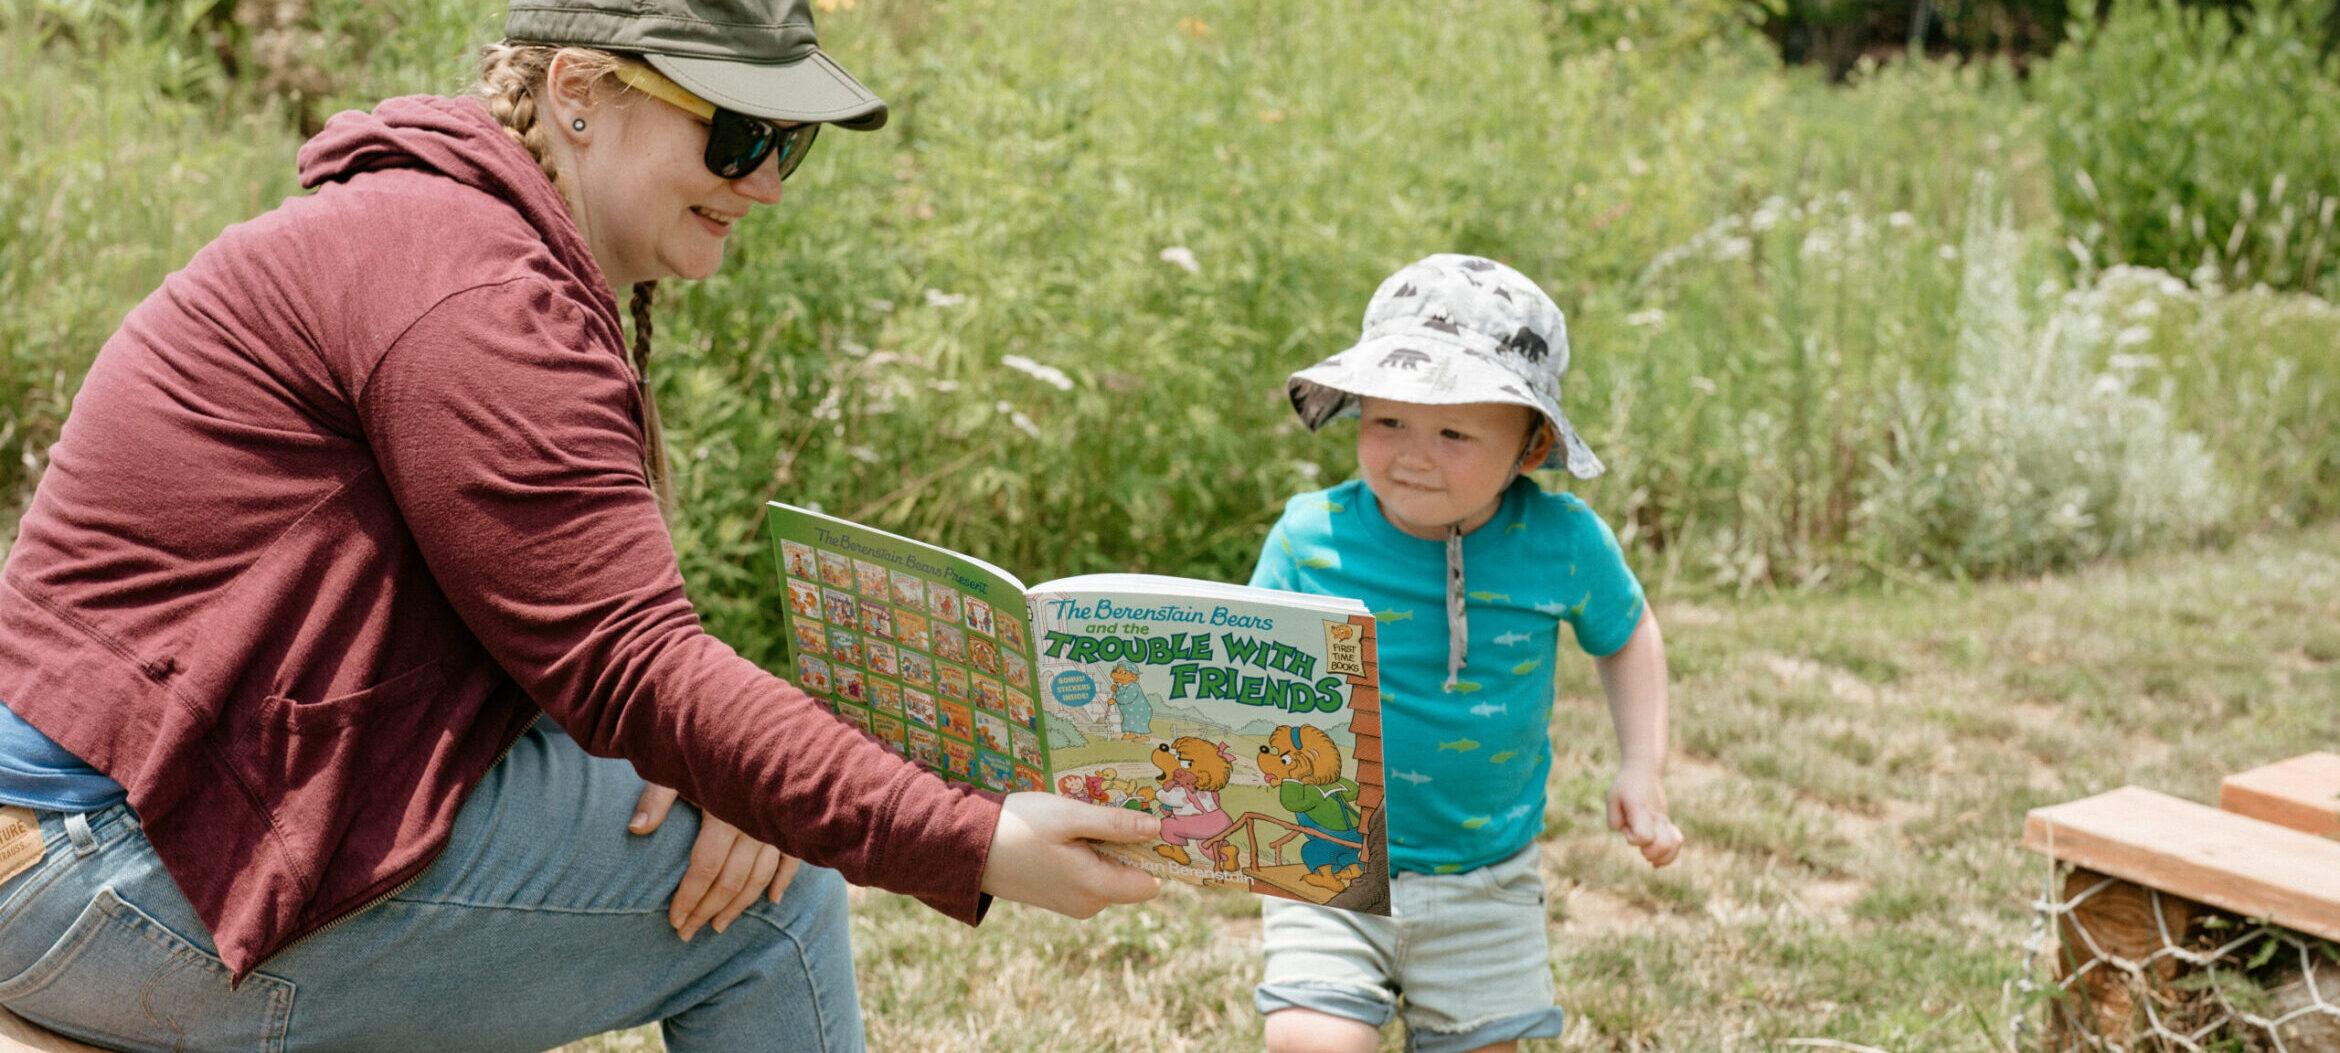 Little boy in a bucket hat and aqua blue shirt, smiling and reading "The Berenstain Bears" with a Pulitzer staff member.